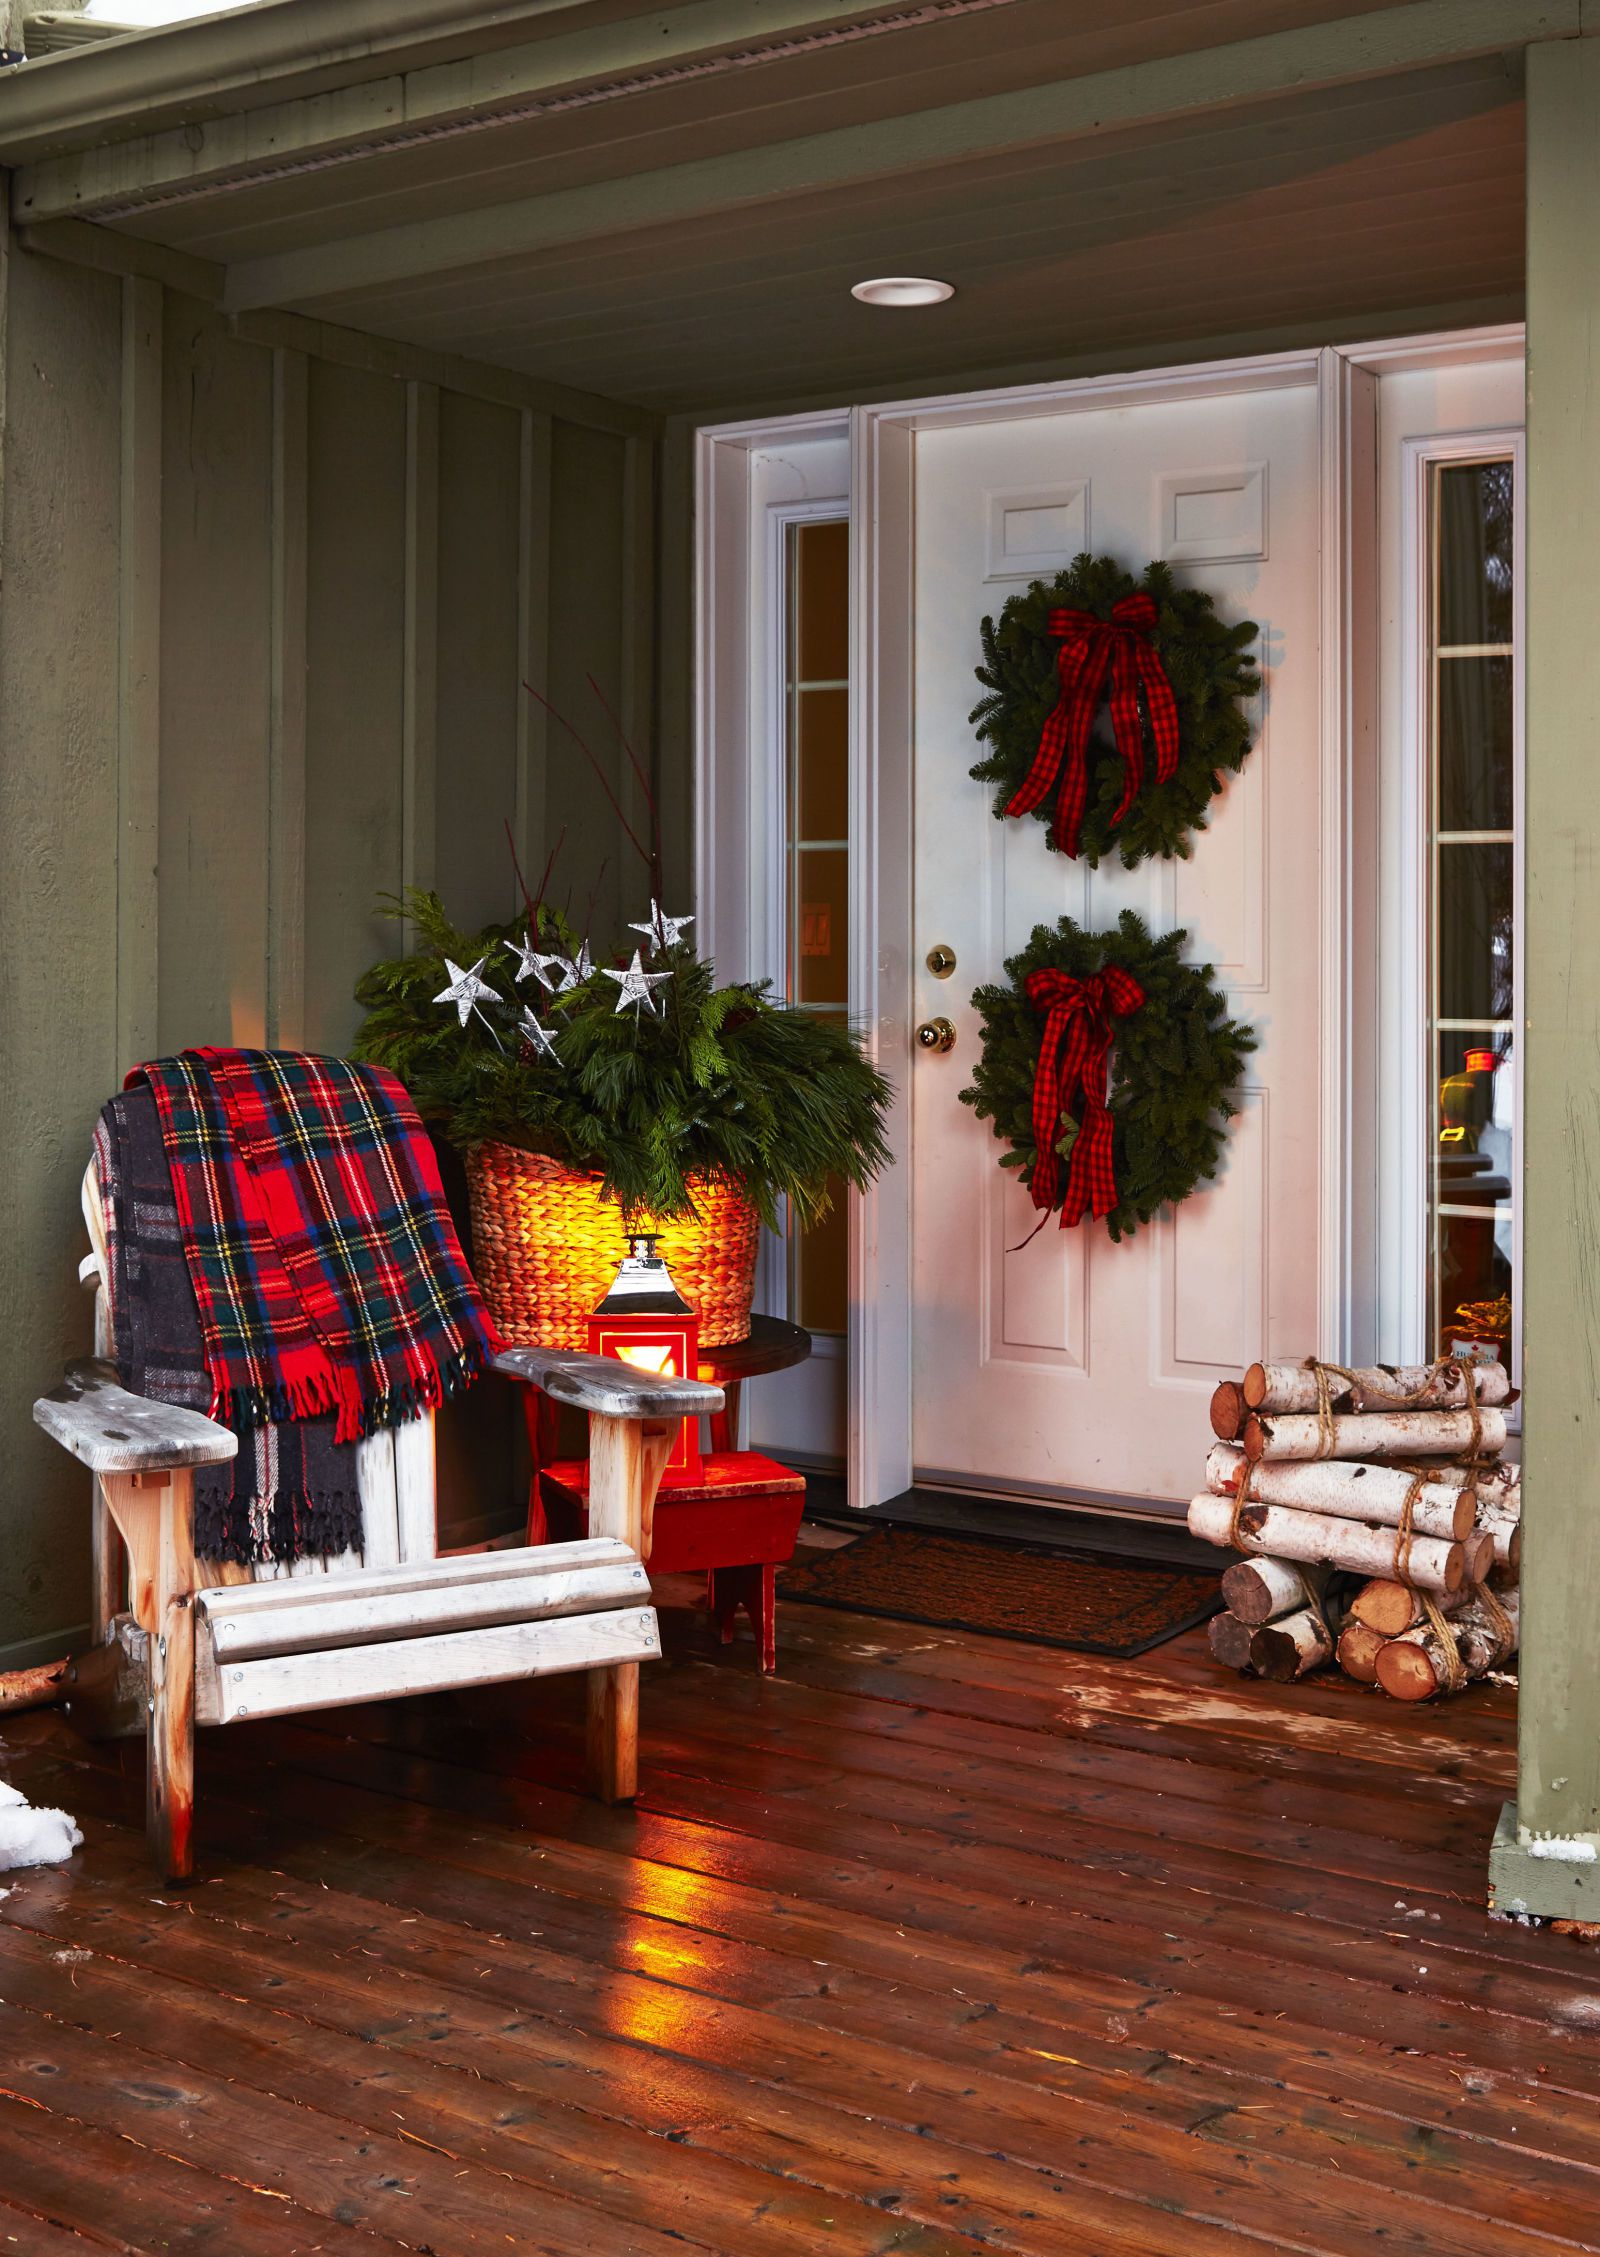 50 Best Outdoor Christmas Decorations - Christmas Yard Decorating Ideas